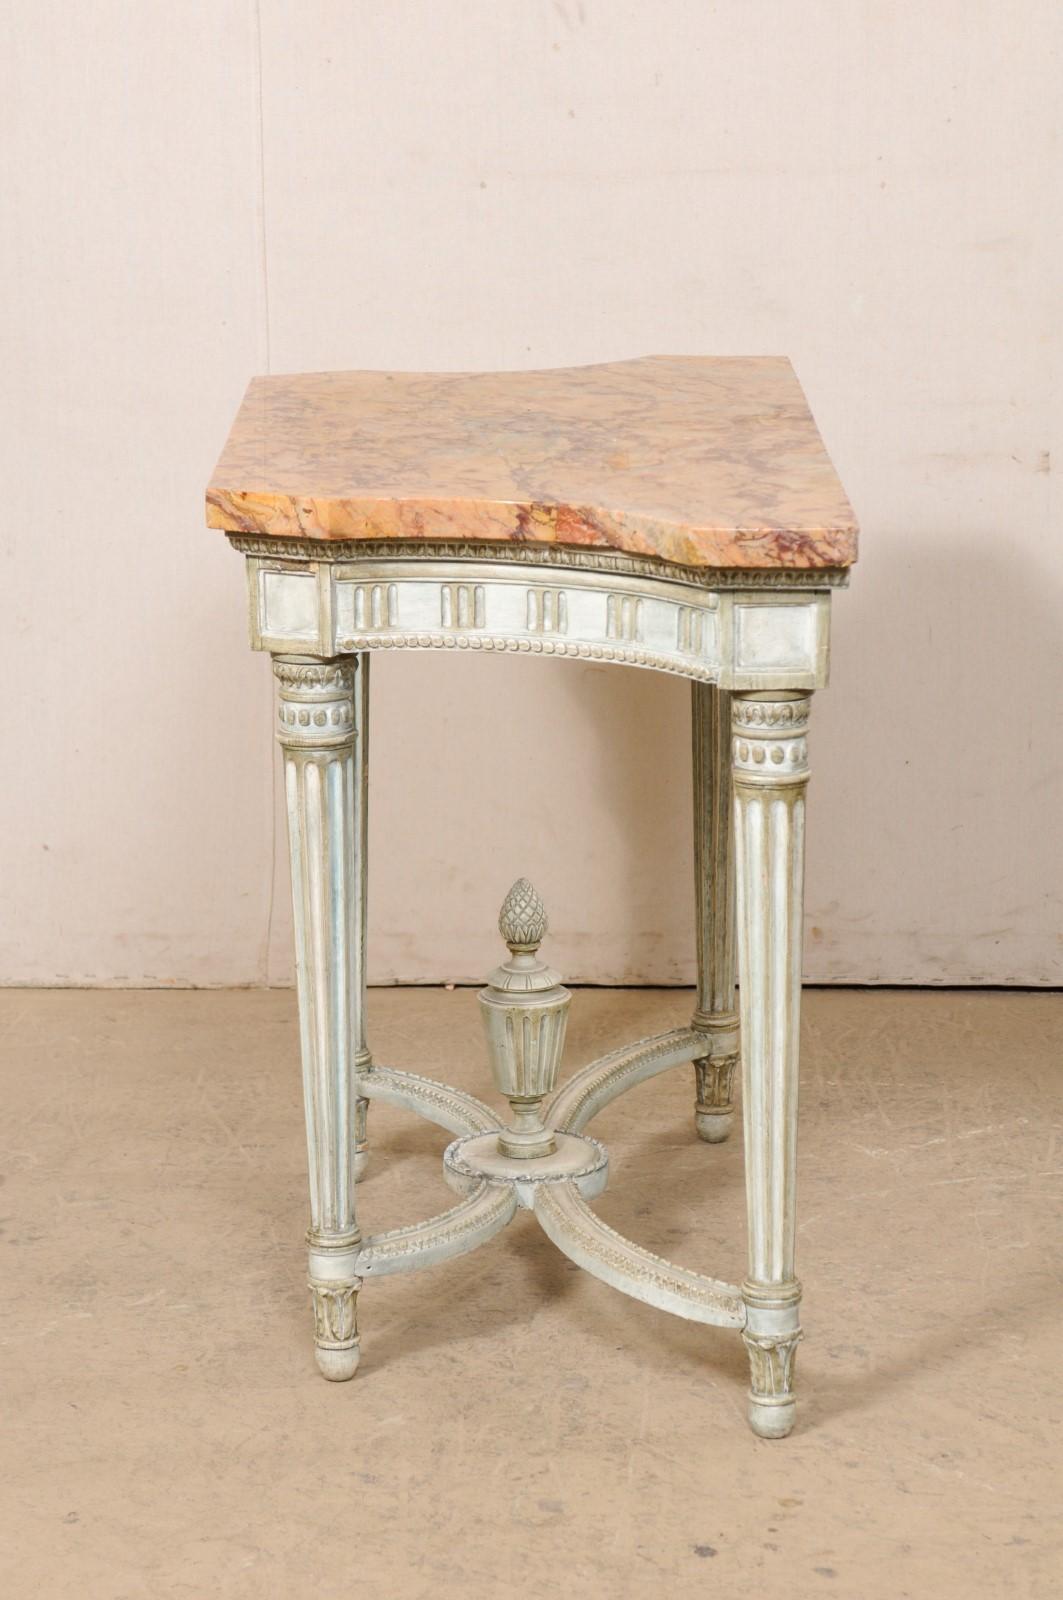 French Neoclassic Period Marble Top Console w/Carved Urn Finial at Underside For Sale 4